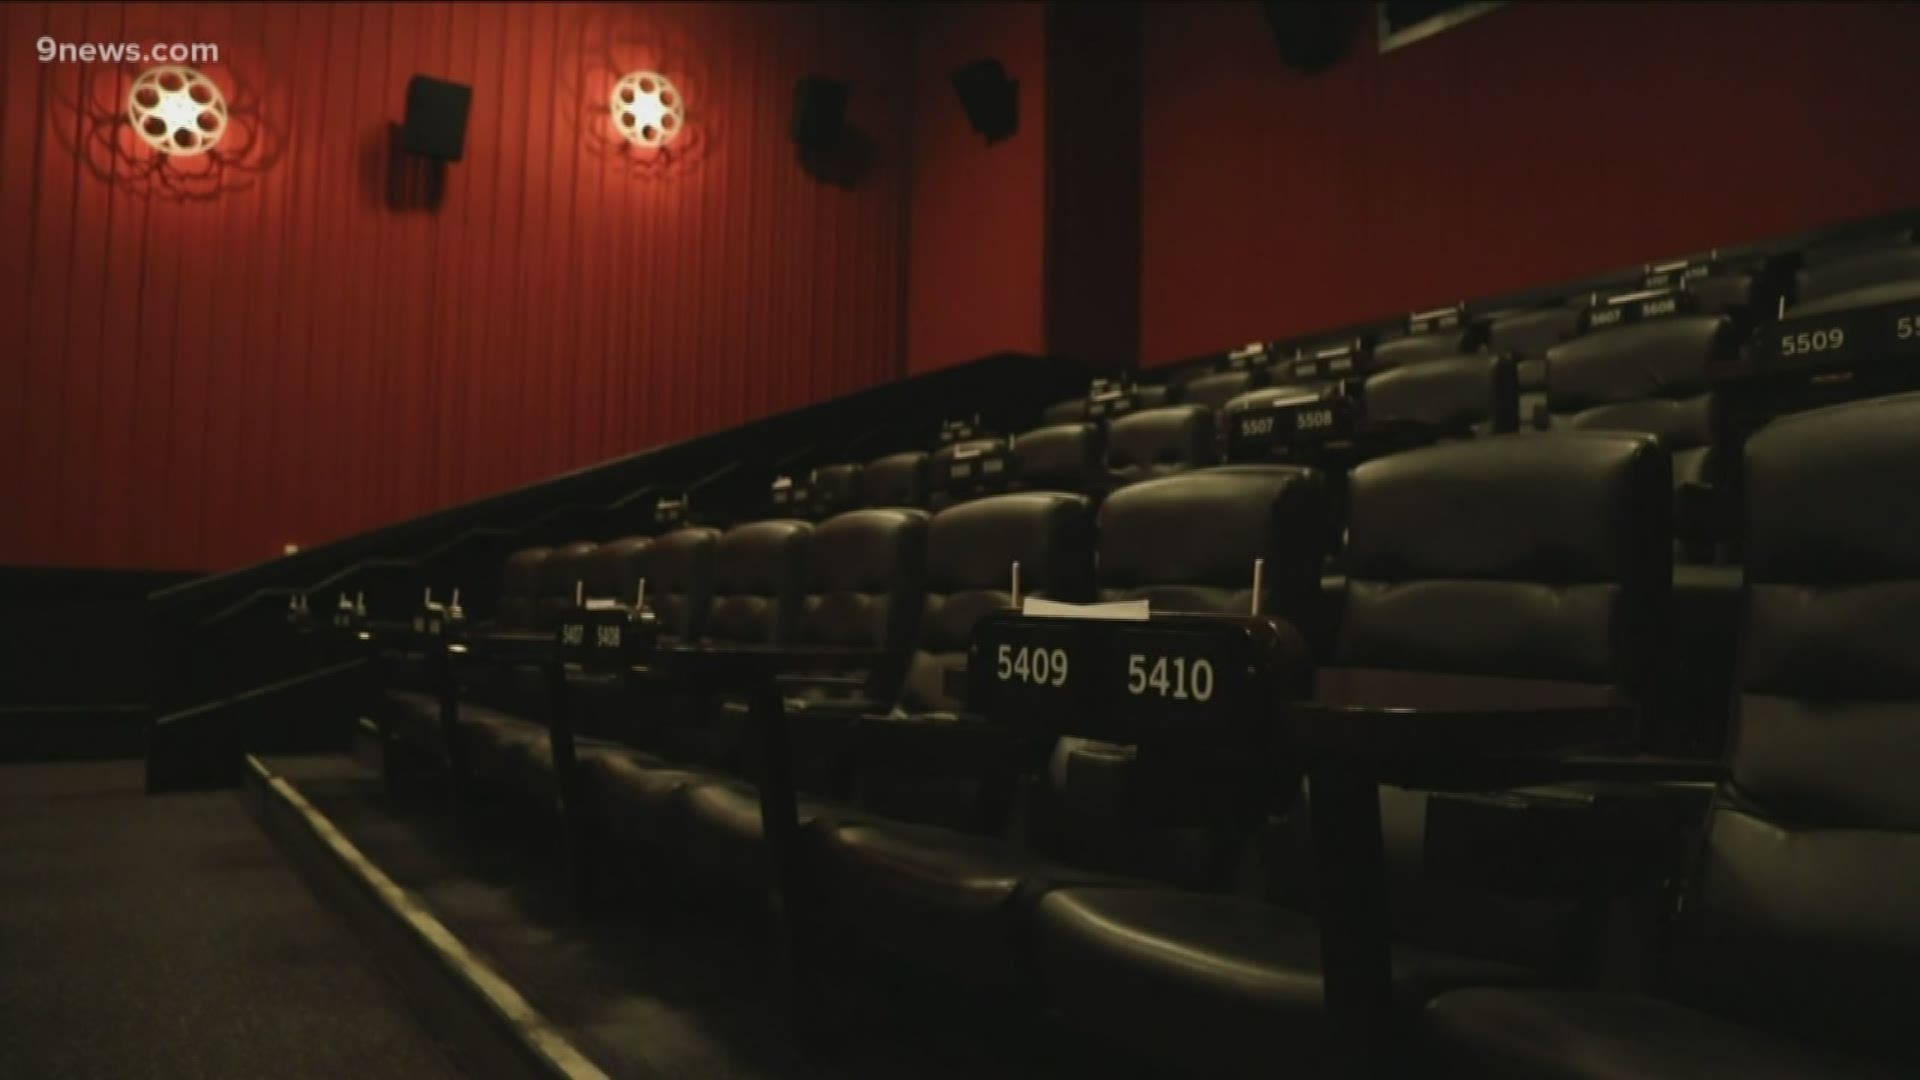 Movie theaters need to get creative to get people to leave their houses in the age of Netflix.